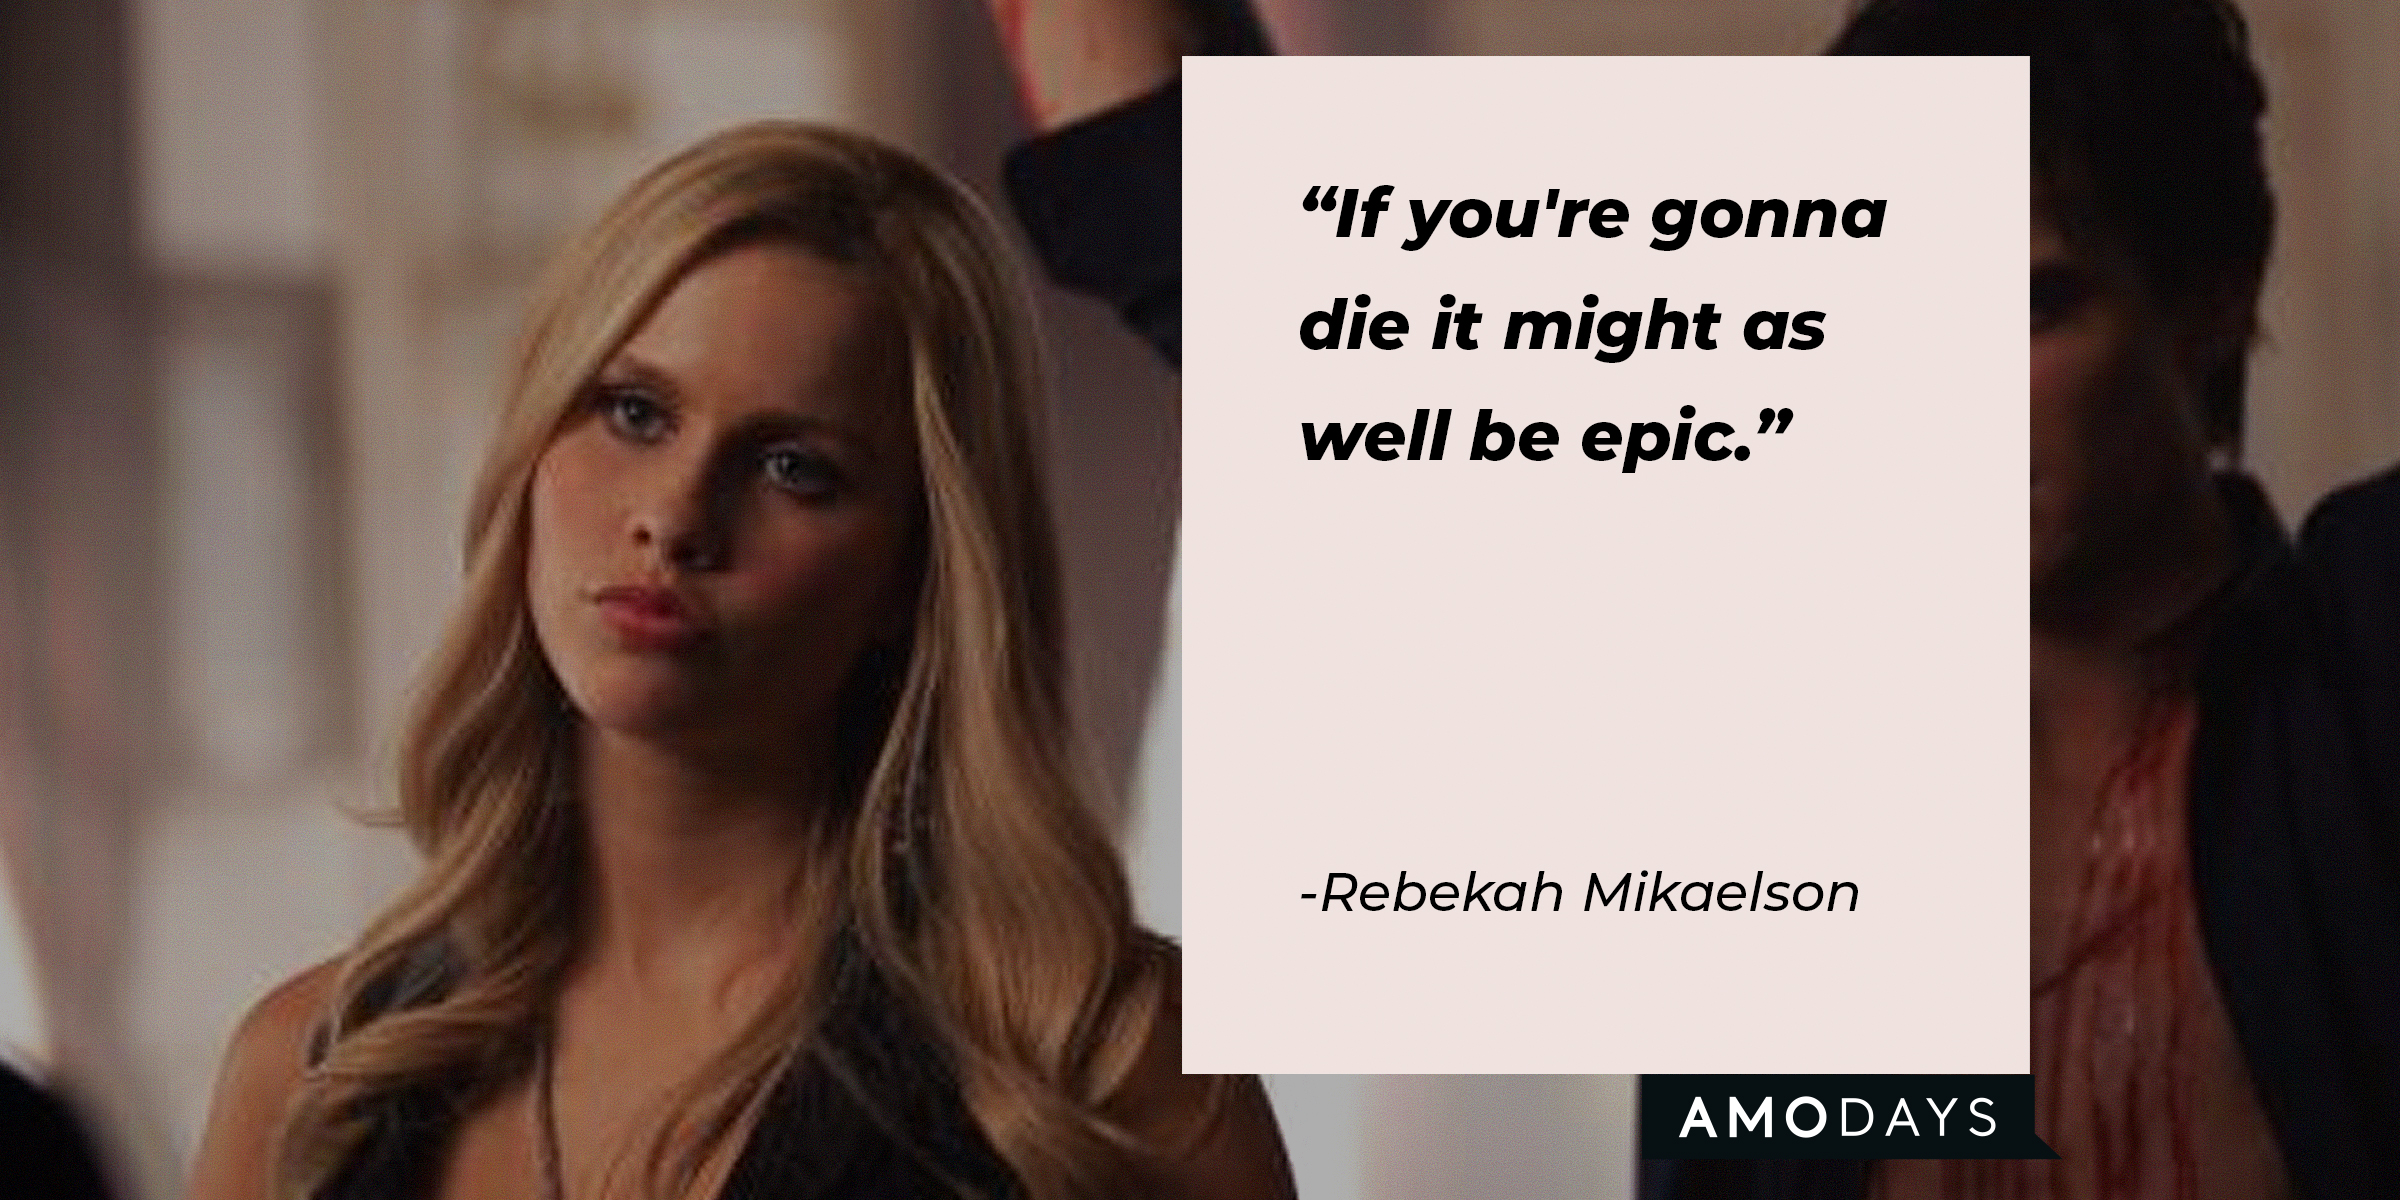 An image of Rebekah Mikaelson with her quote “If you're gonna die it might as well be epic.” | Source: facebook.com/thevampirediaries